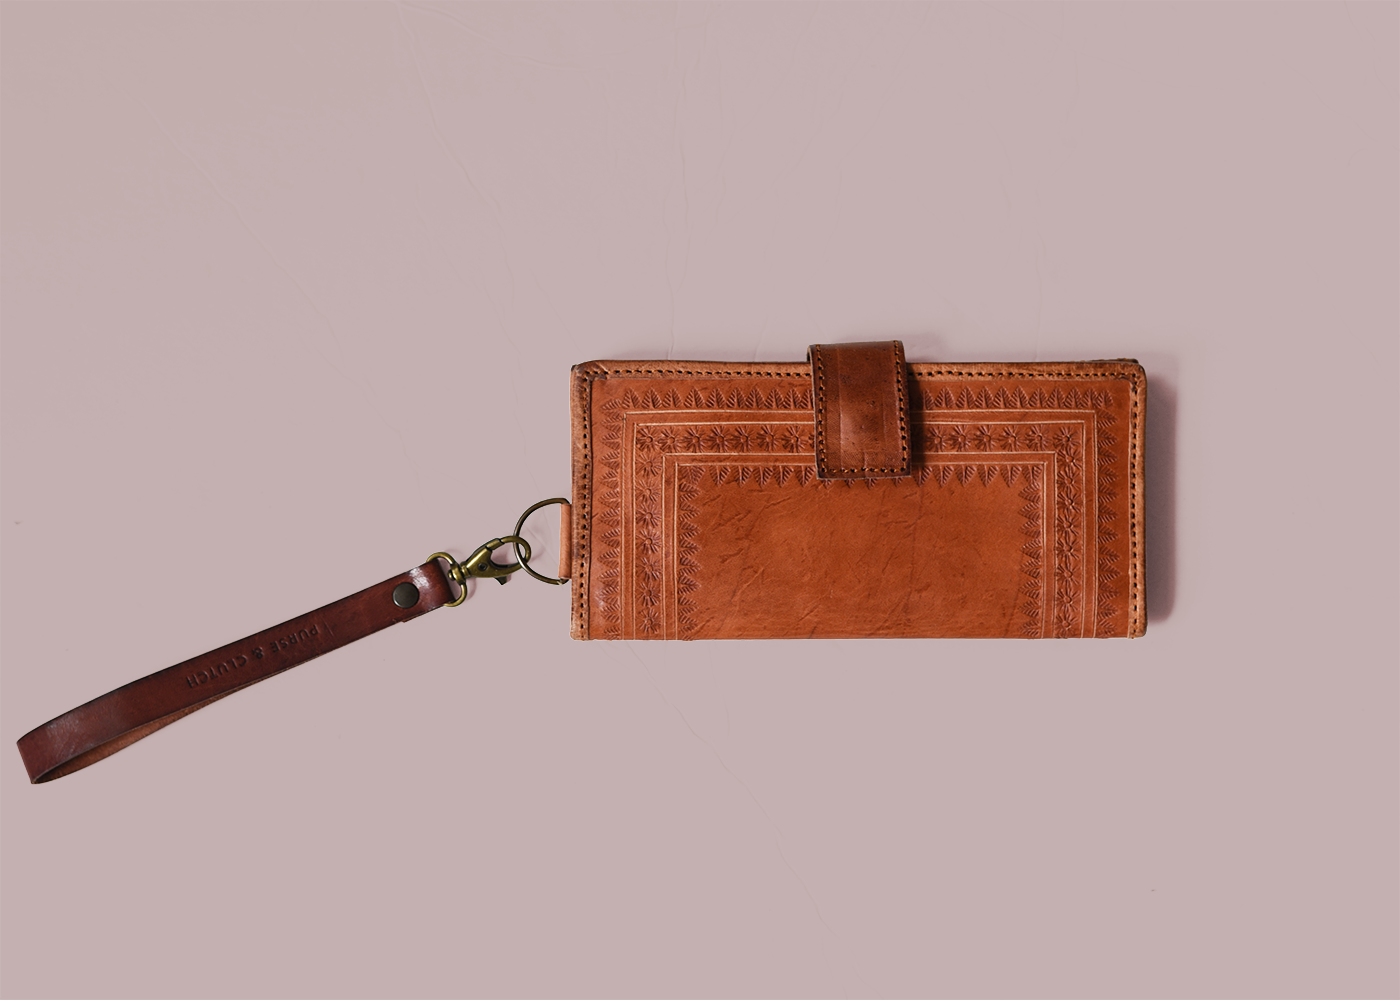 Ethically handmade leather wallets from Chiapas